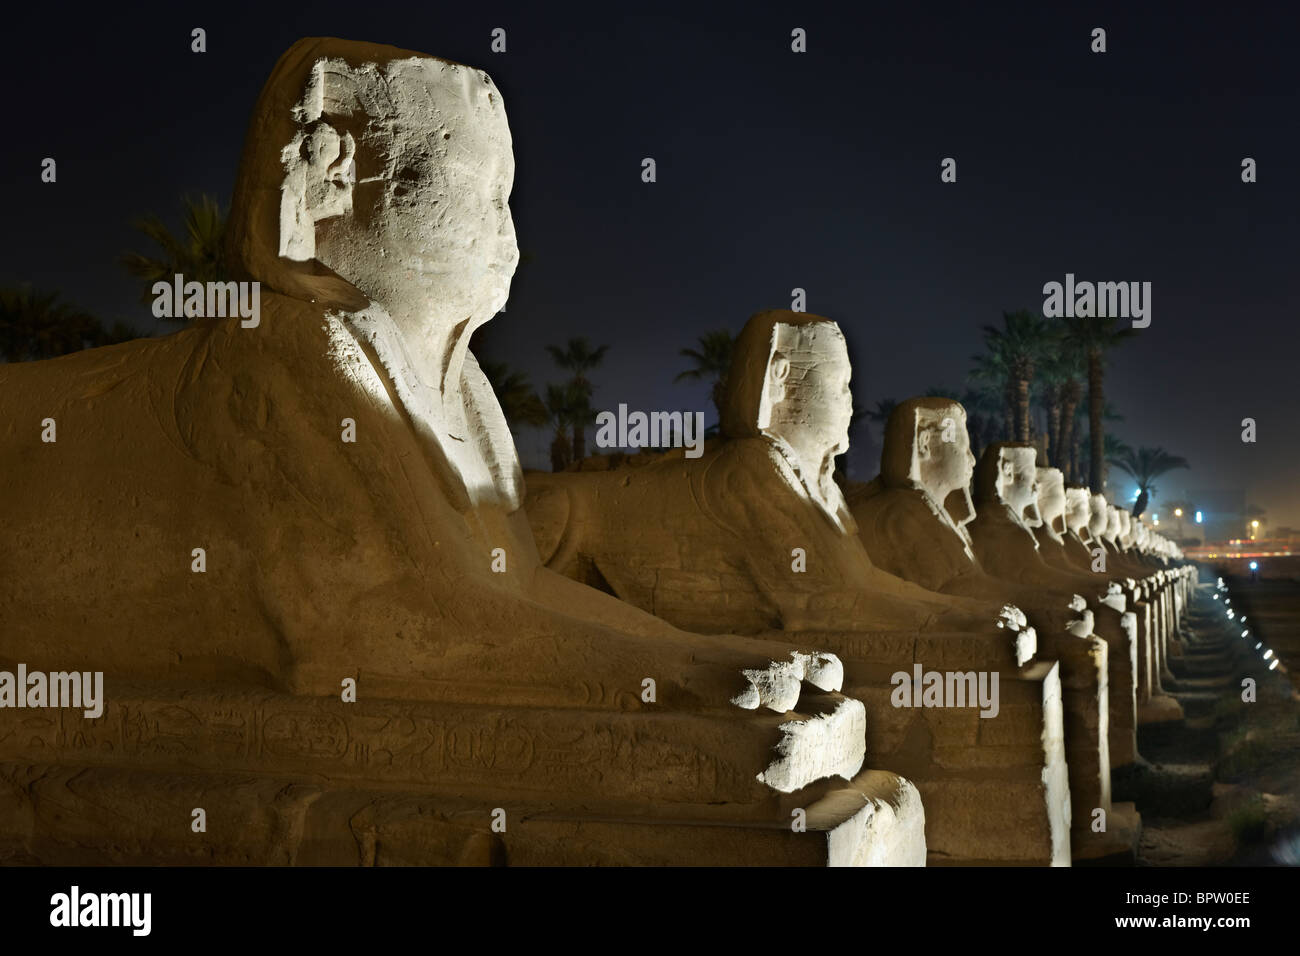 night shot way of sphinxes in Temple of Luxor, Thebes, Egypt, Arabia, Africa Stock Photo